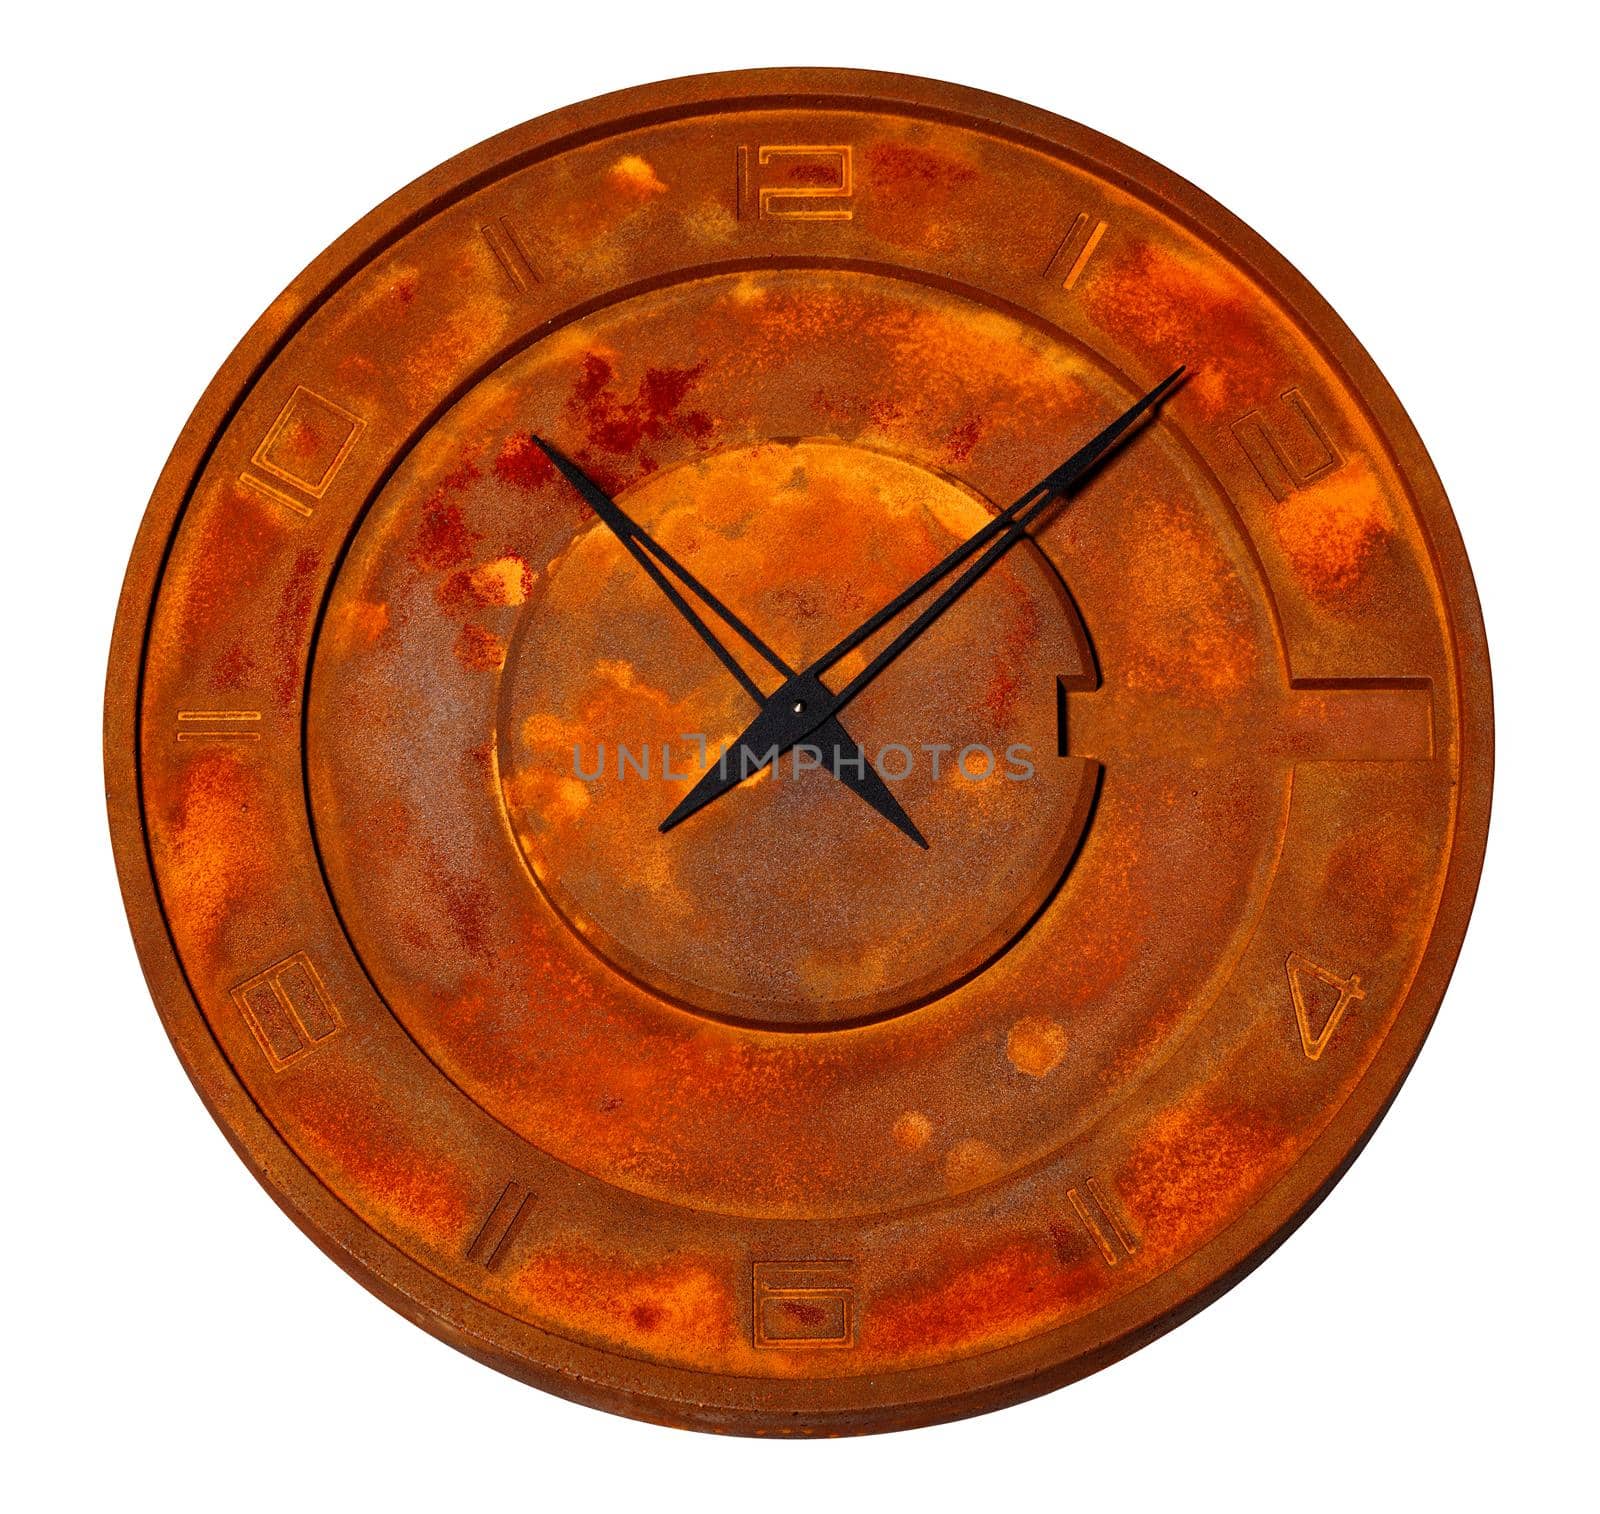 Unusual industrial iron wall clock covered with solid rust, isolated on white background. by Sergii